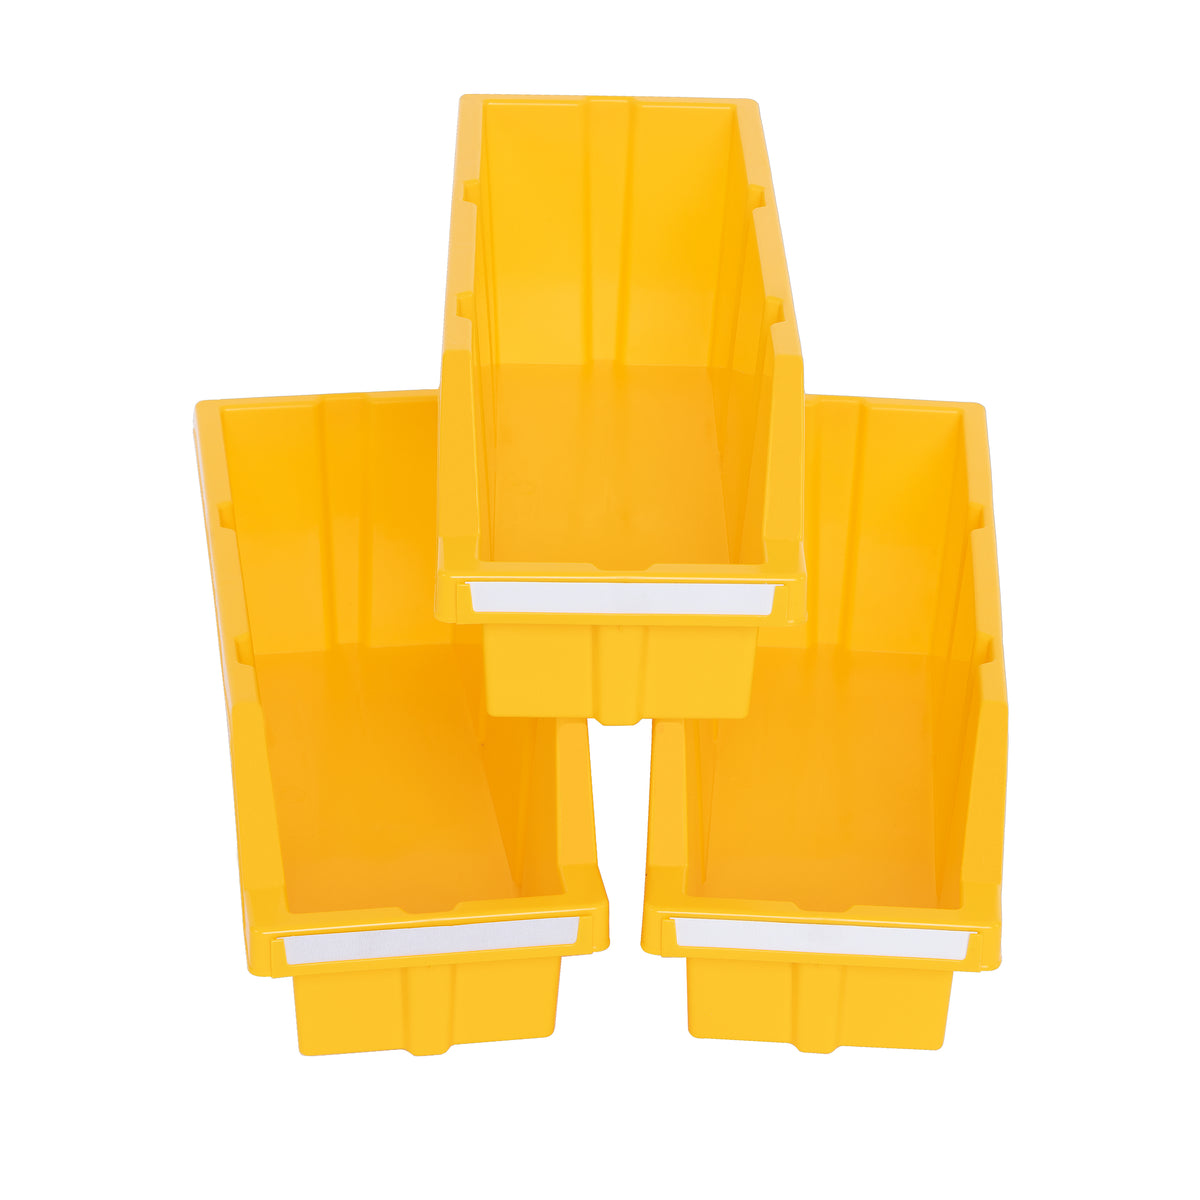 XL Yellow Bins for Commercial Bin Rack (2-Pack) – Seville Classics